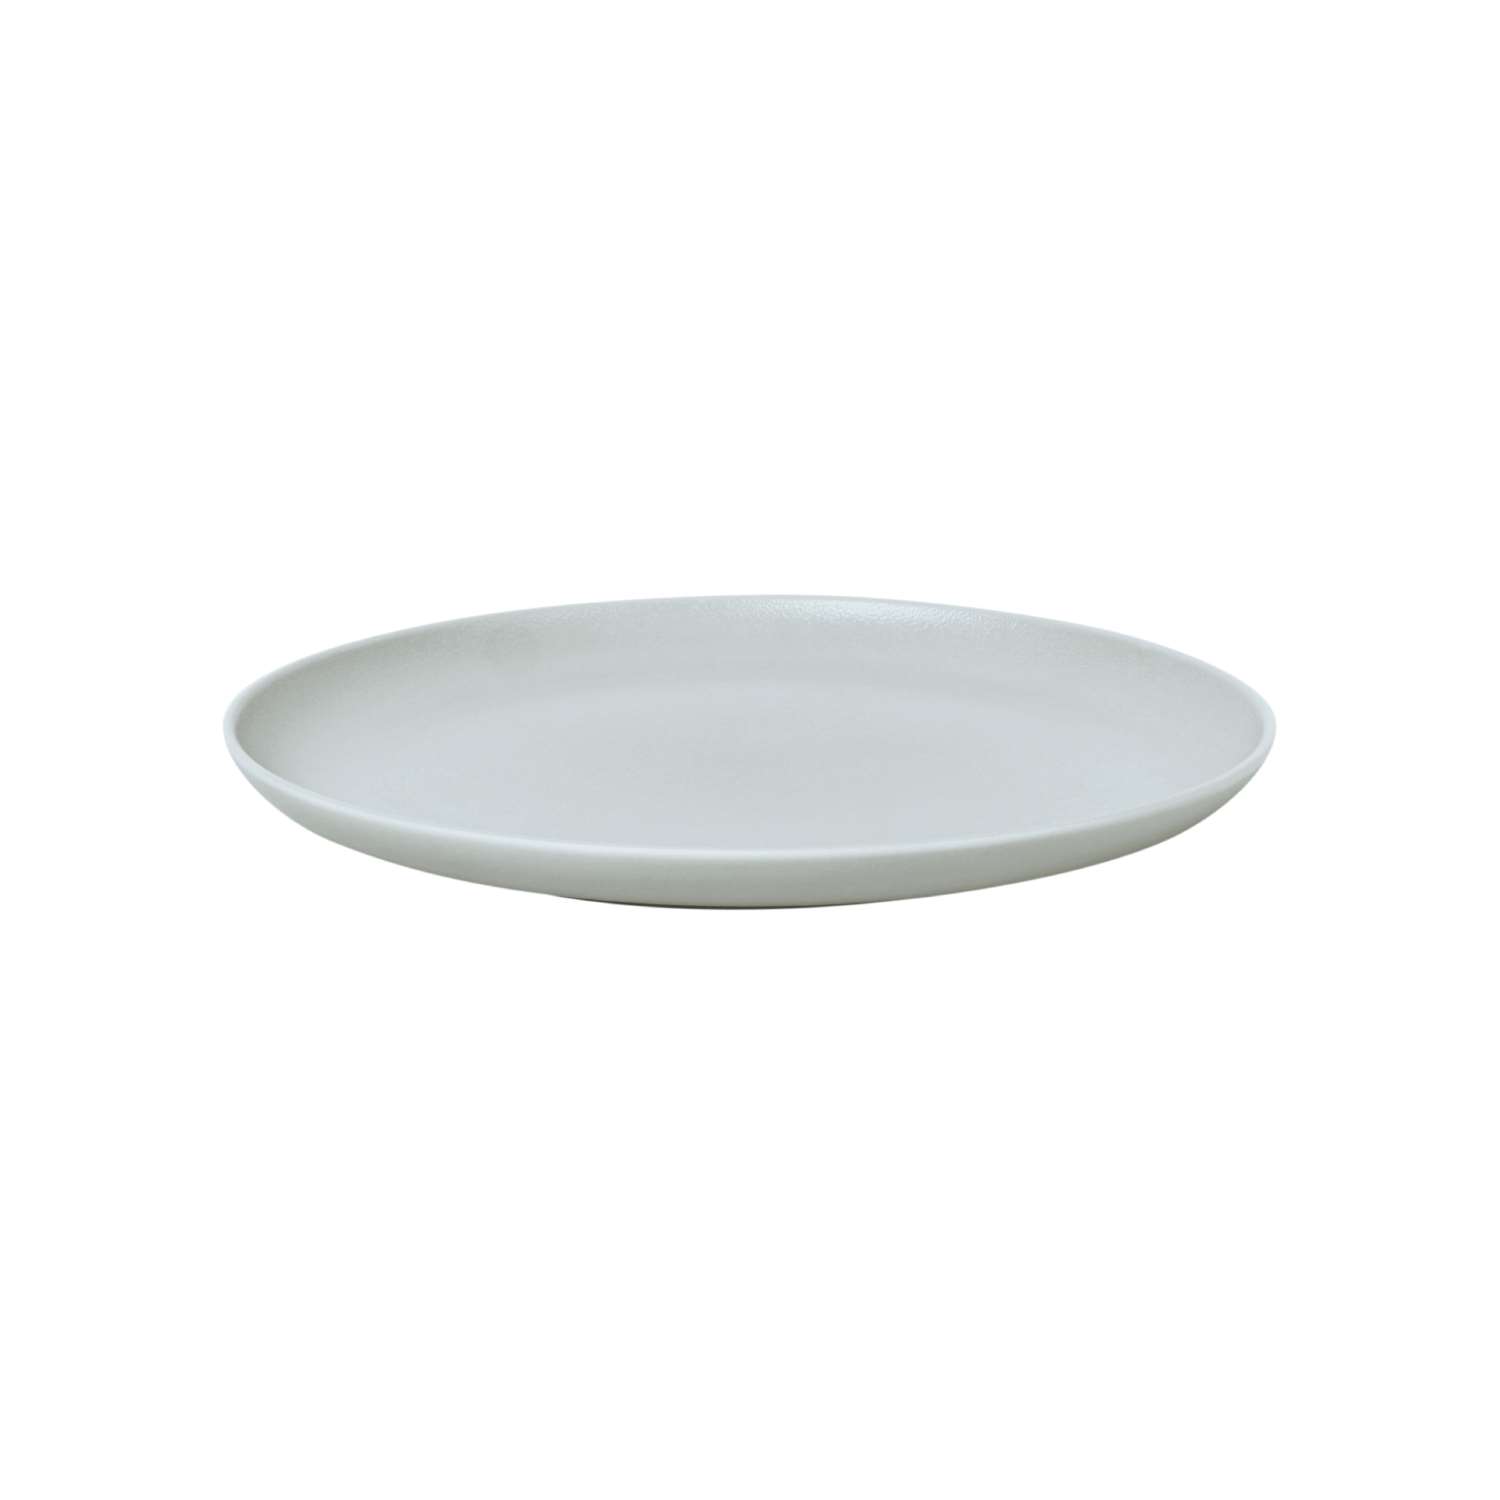 Baralee Light Grey Coupe Plate 26 Cm